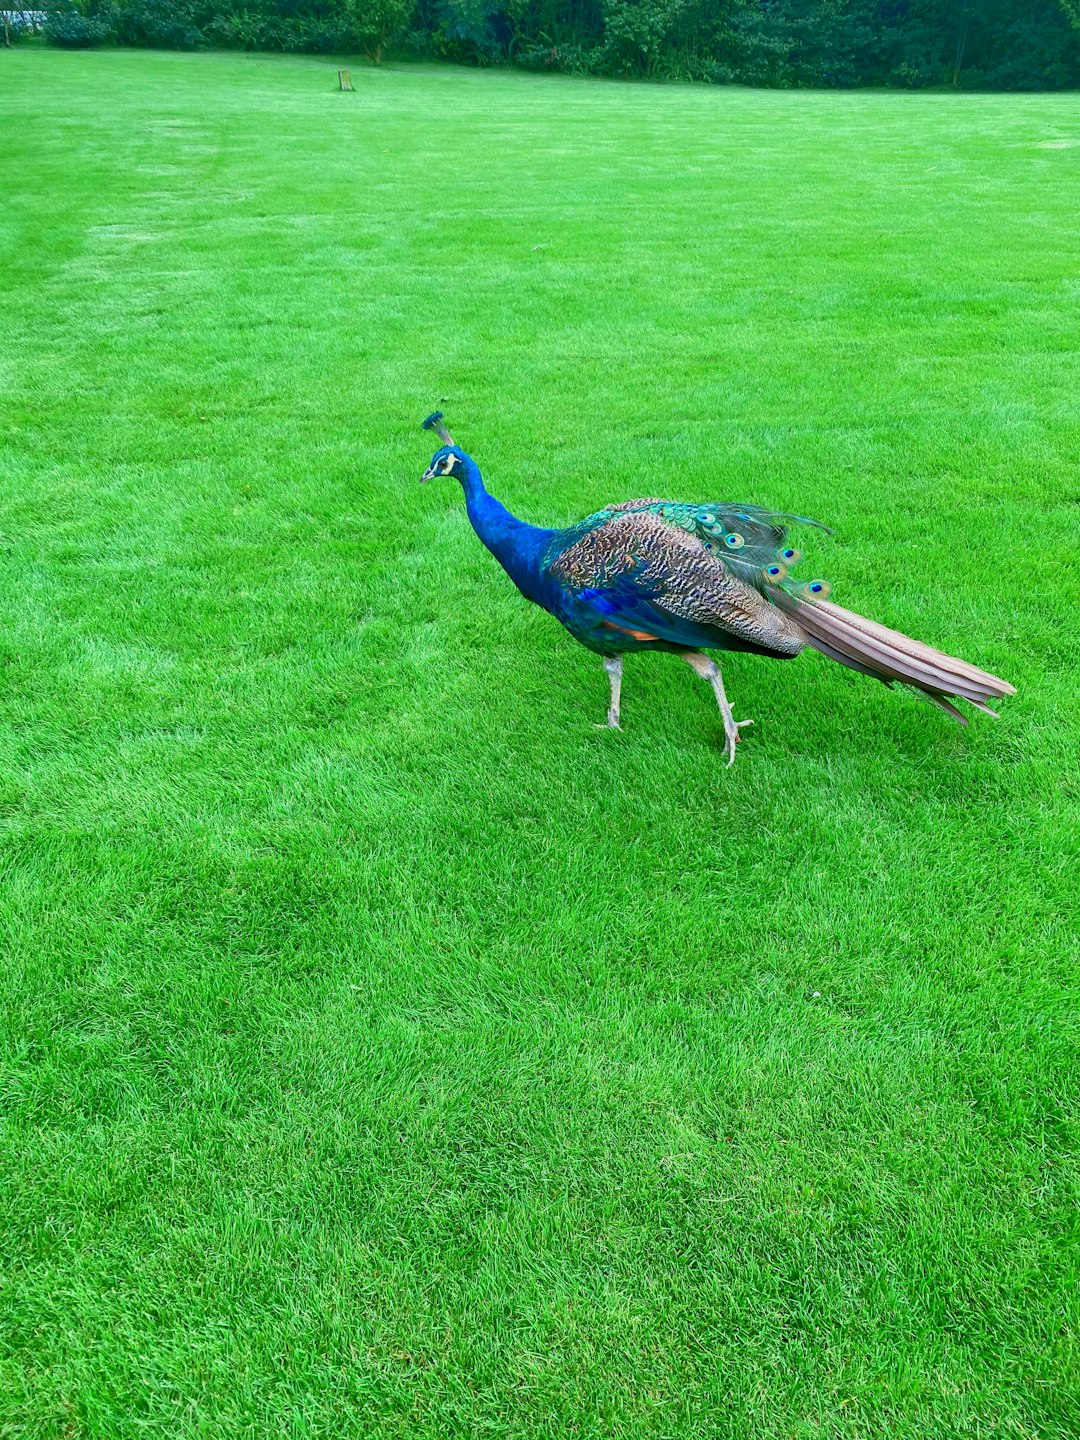 peacock on green grass field during daytime